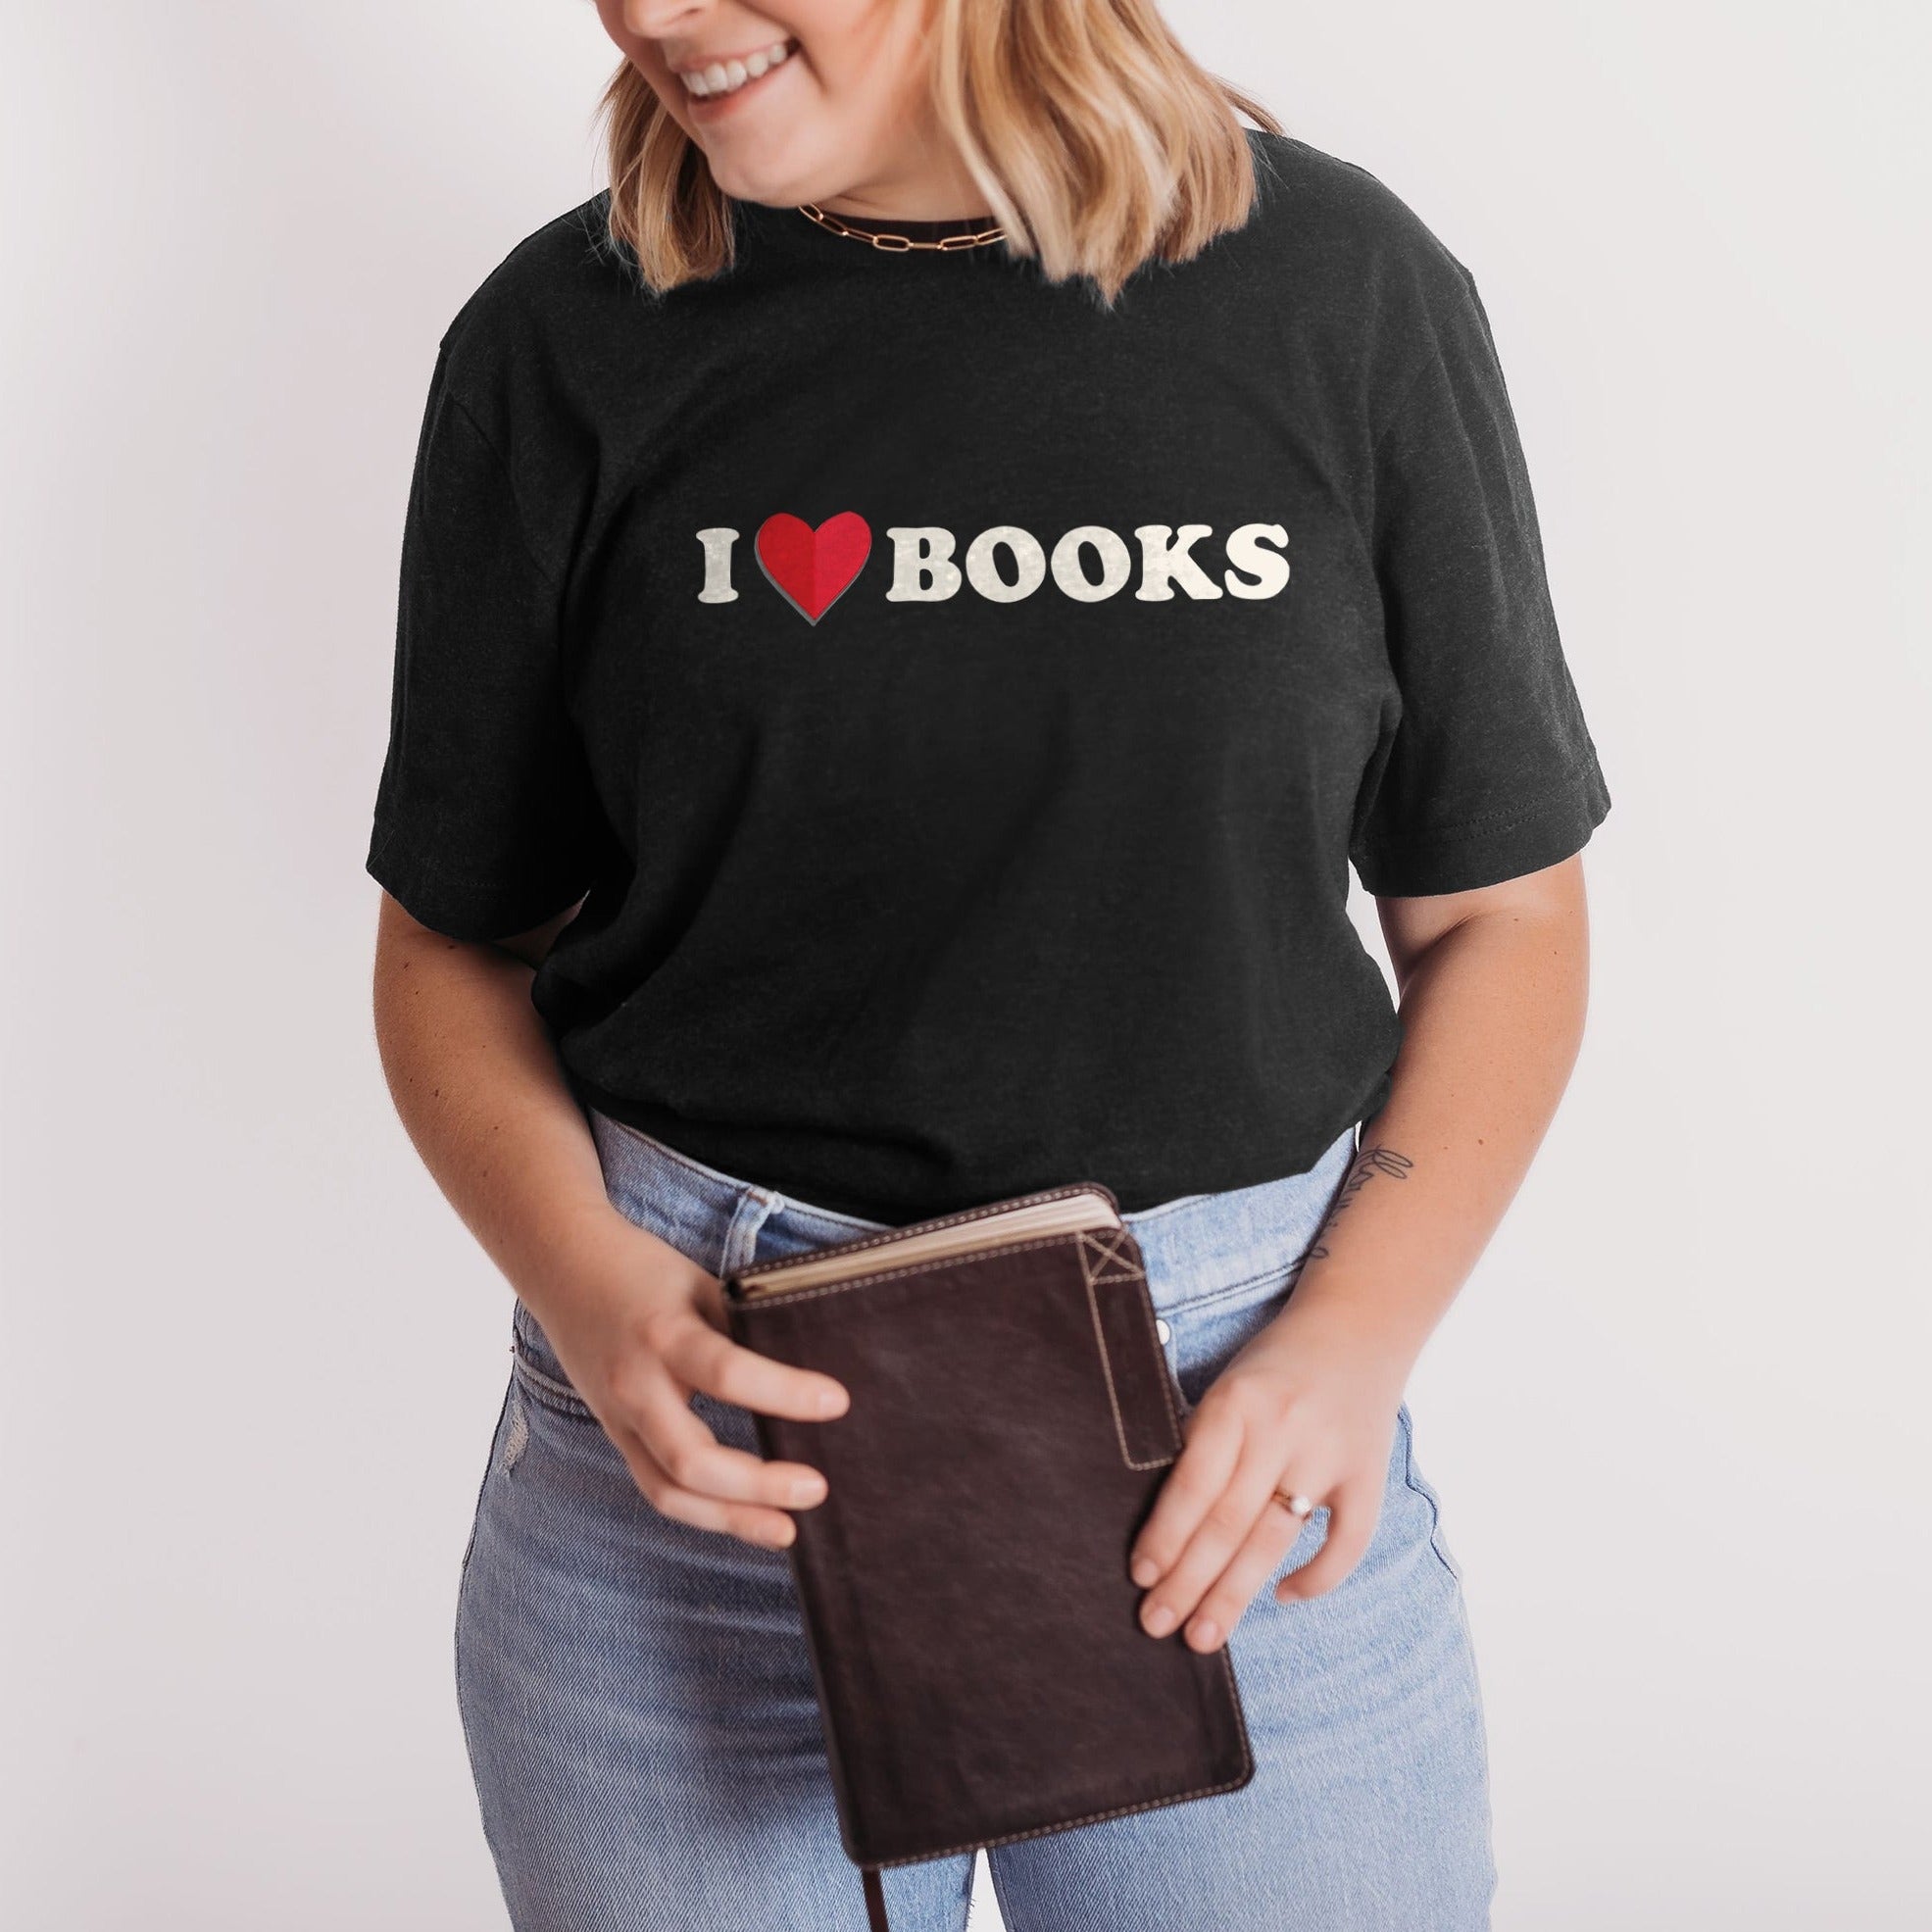 Book Lovers